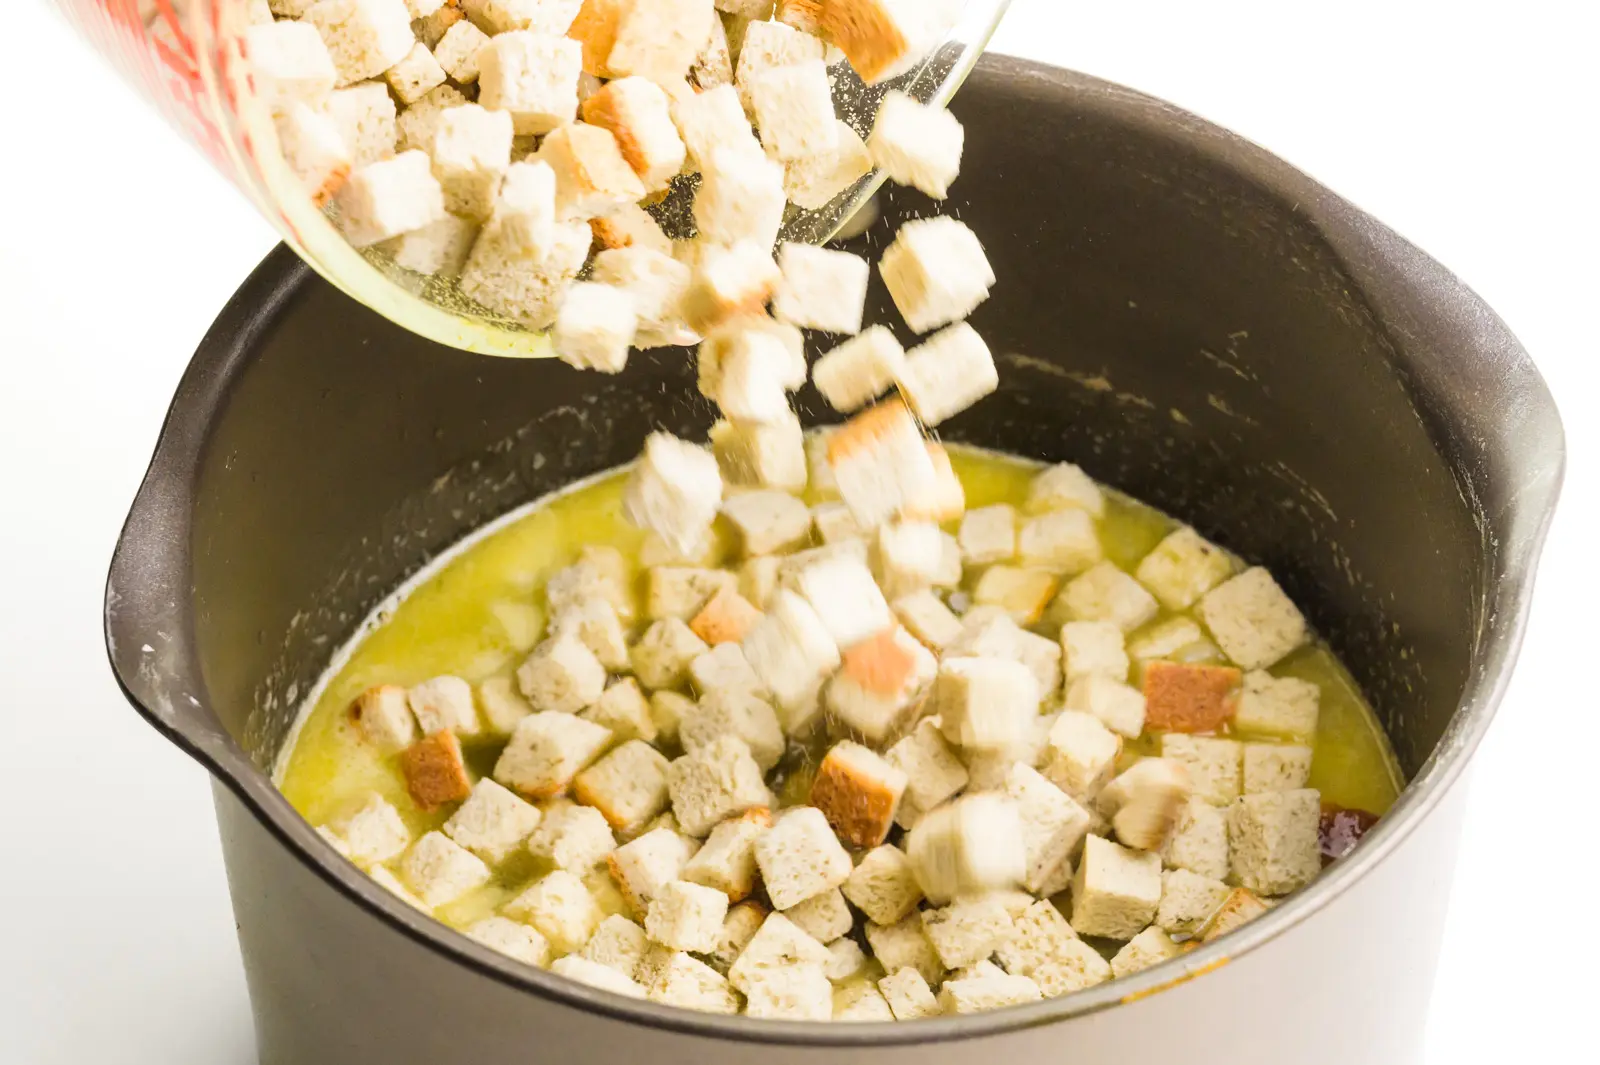 Stuffing mix is being poured into a pan with a vegetable broth mixture.